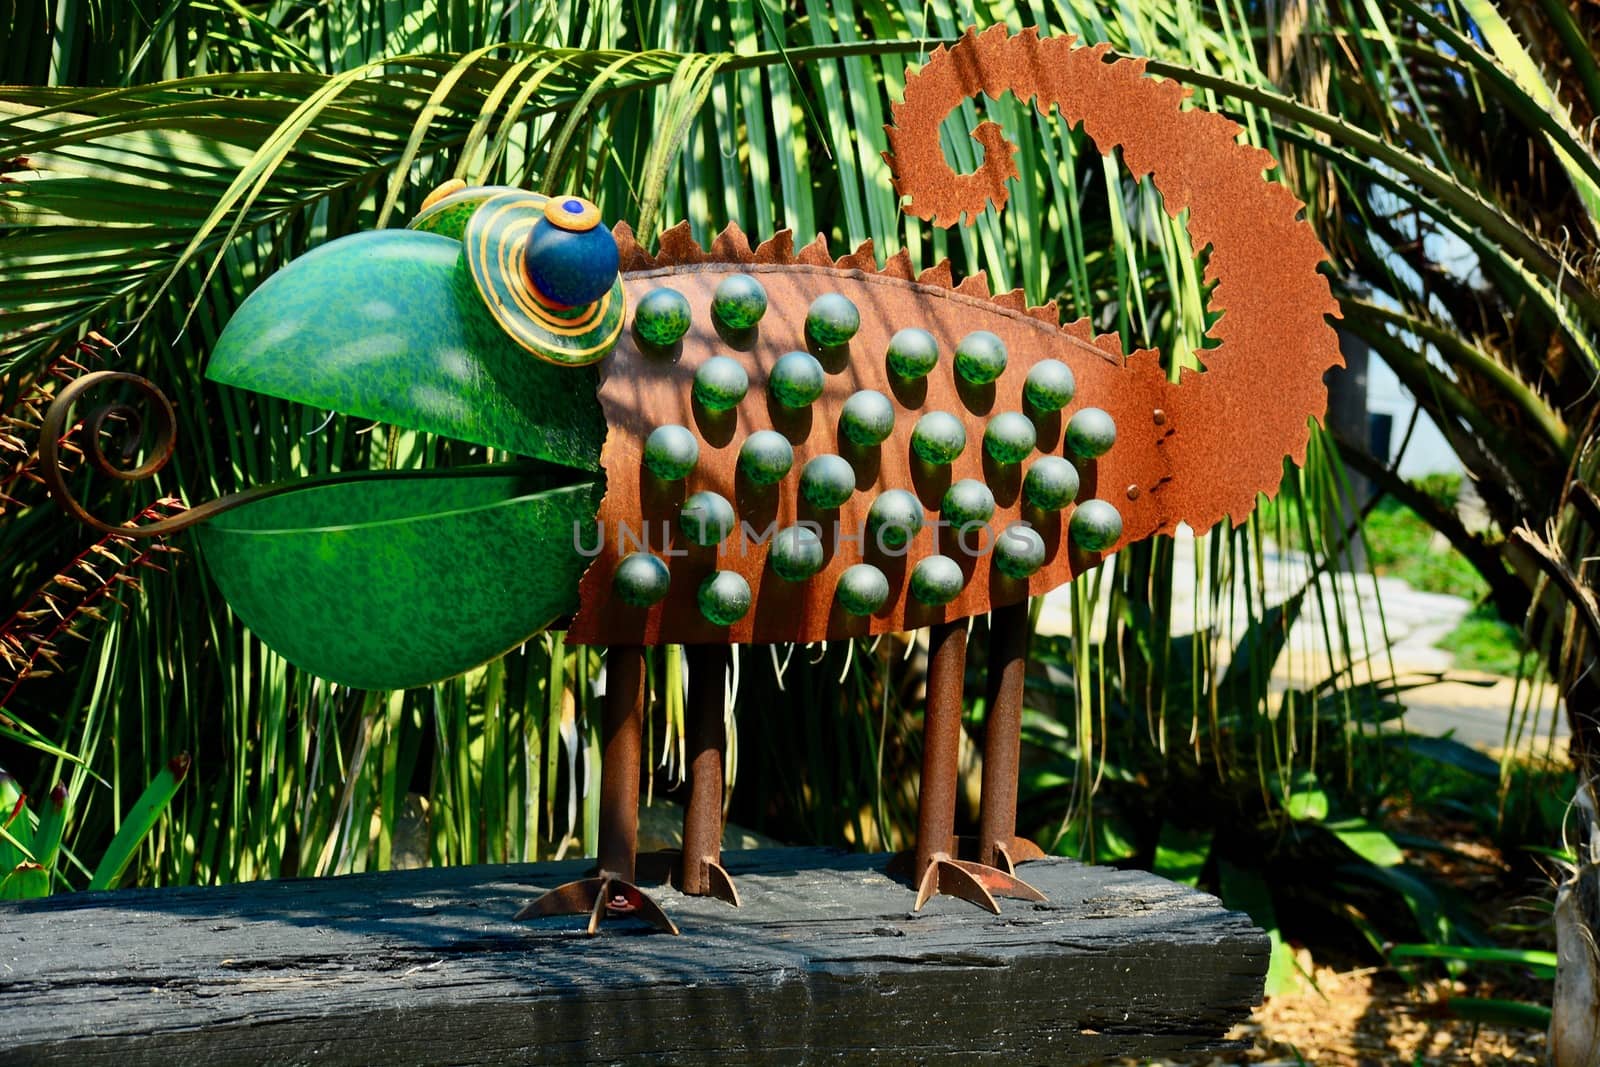 Funny garden sculpture representing a chameleon. Glass and rusty metal as its building elements.